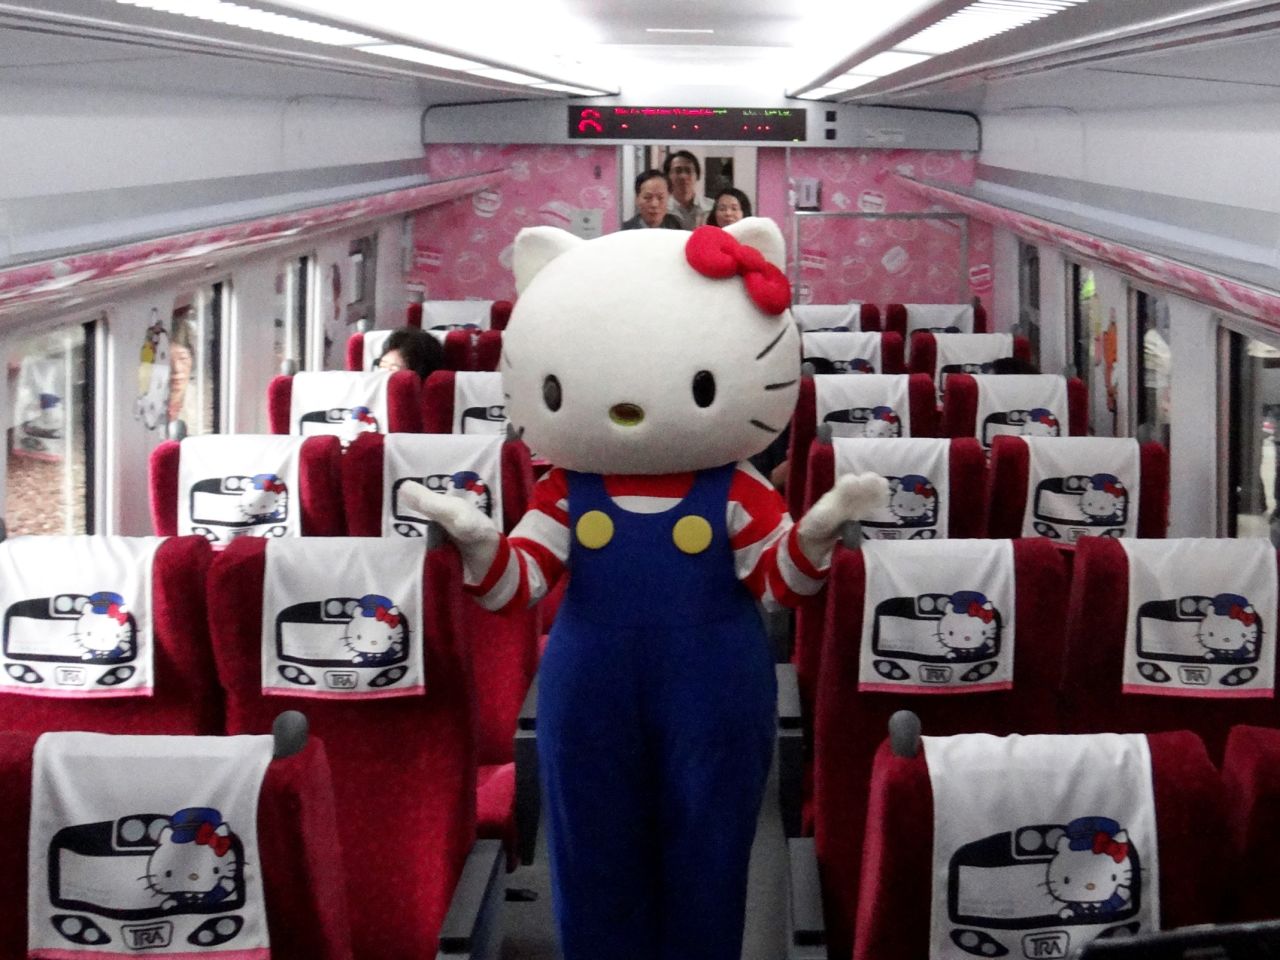 On the list of global icons of weirdly enduring cool, Hello Kitty ranks somewhere between James Bond and Snoop Dogg. In Taiwan, the mouthless product flogger now has its own train.